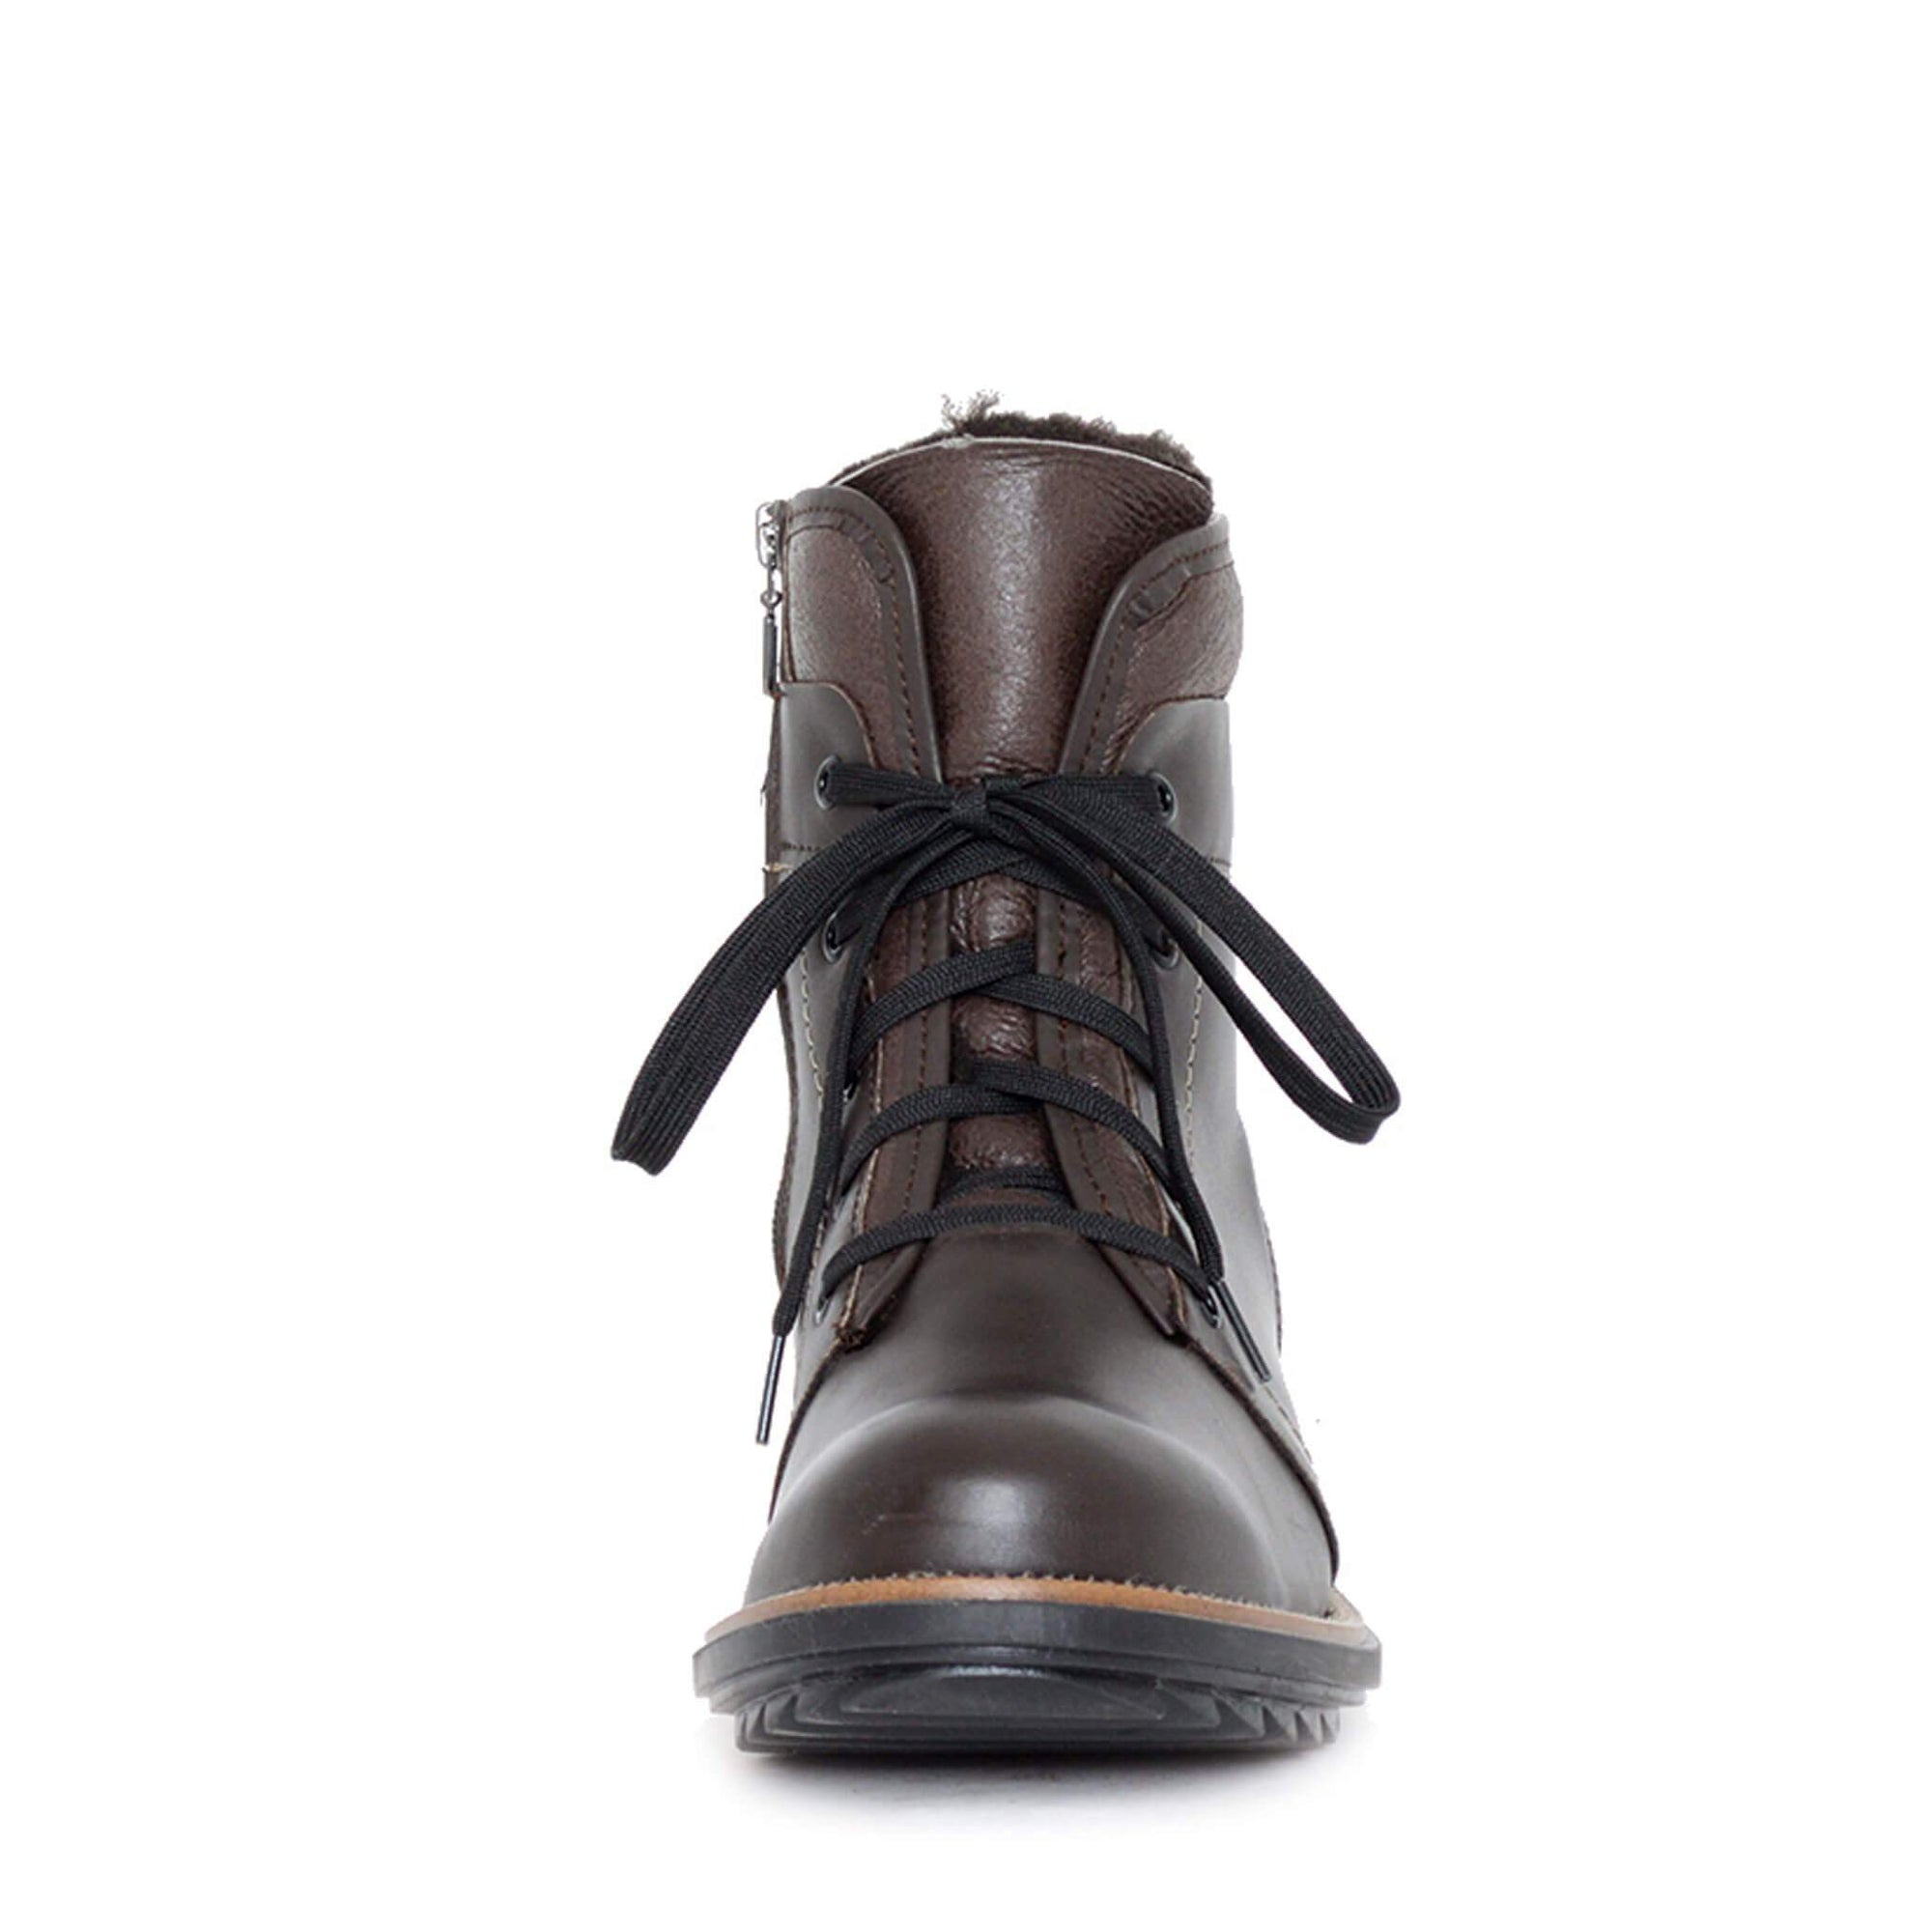 Malcolm winter boot for men - Brown